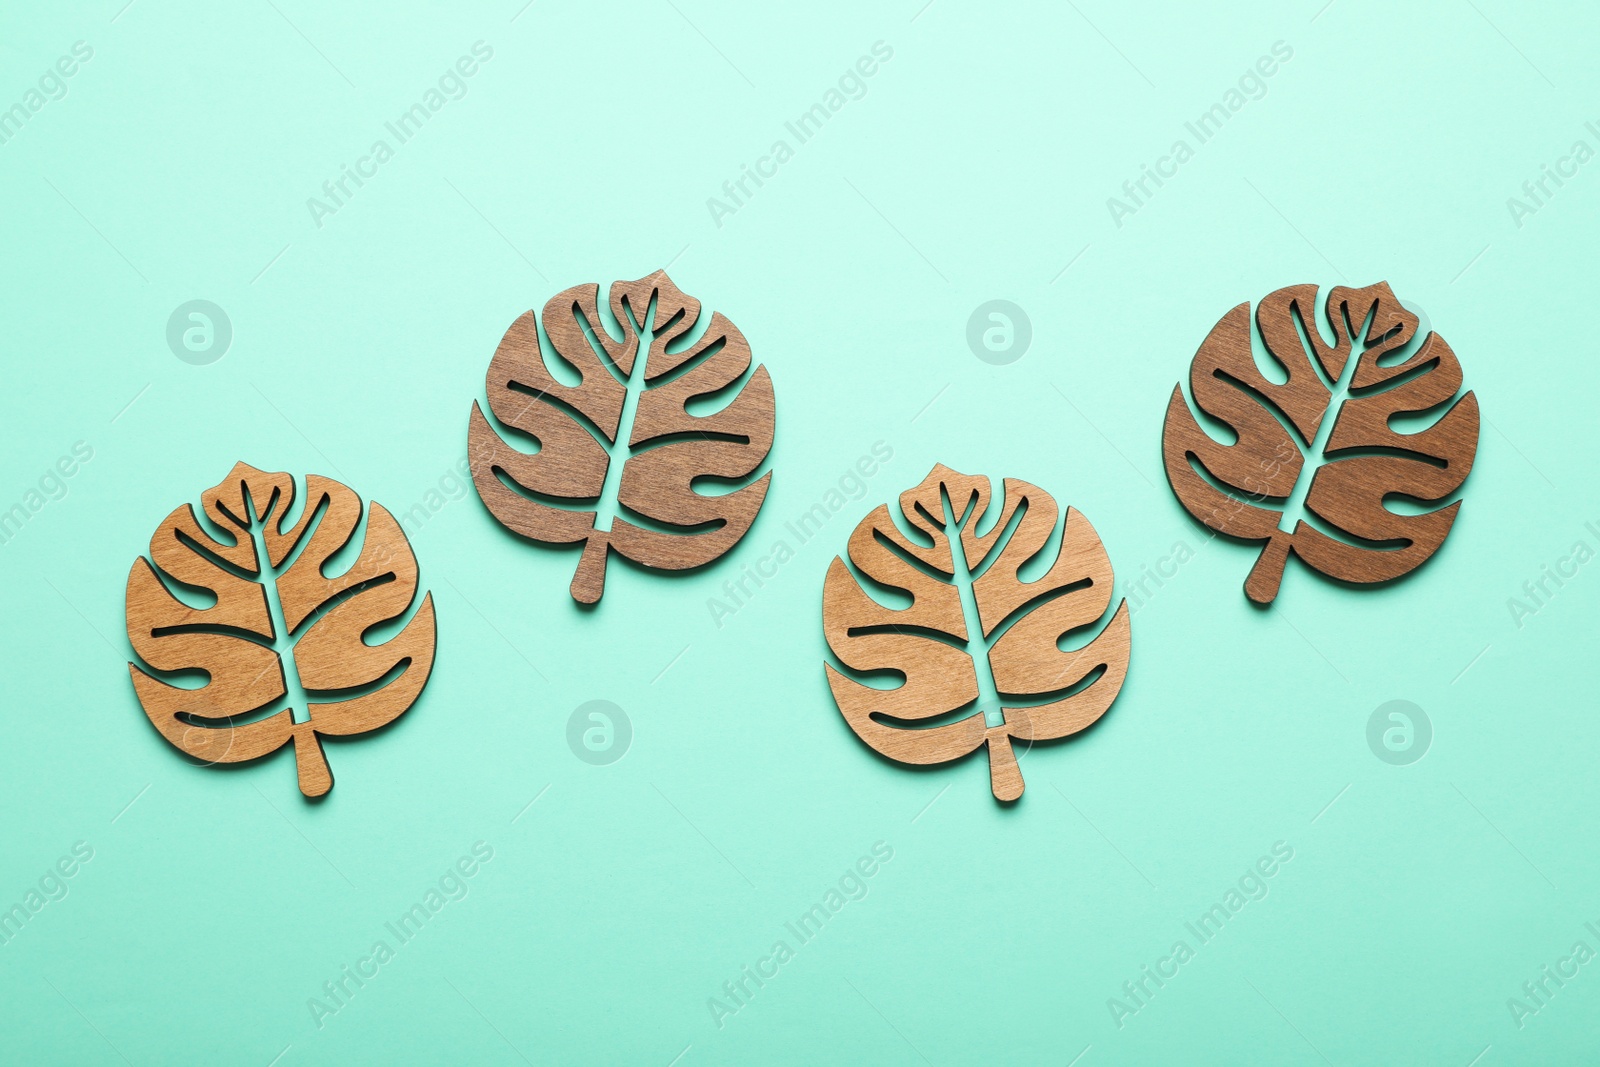 Photo of Leaf shaped wooden cup coasters on turquoise background, flat lay